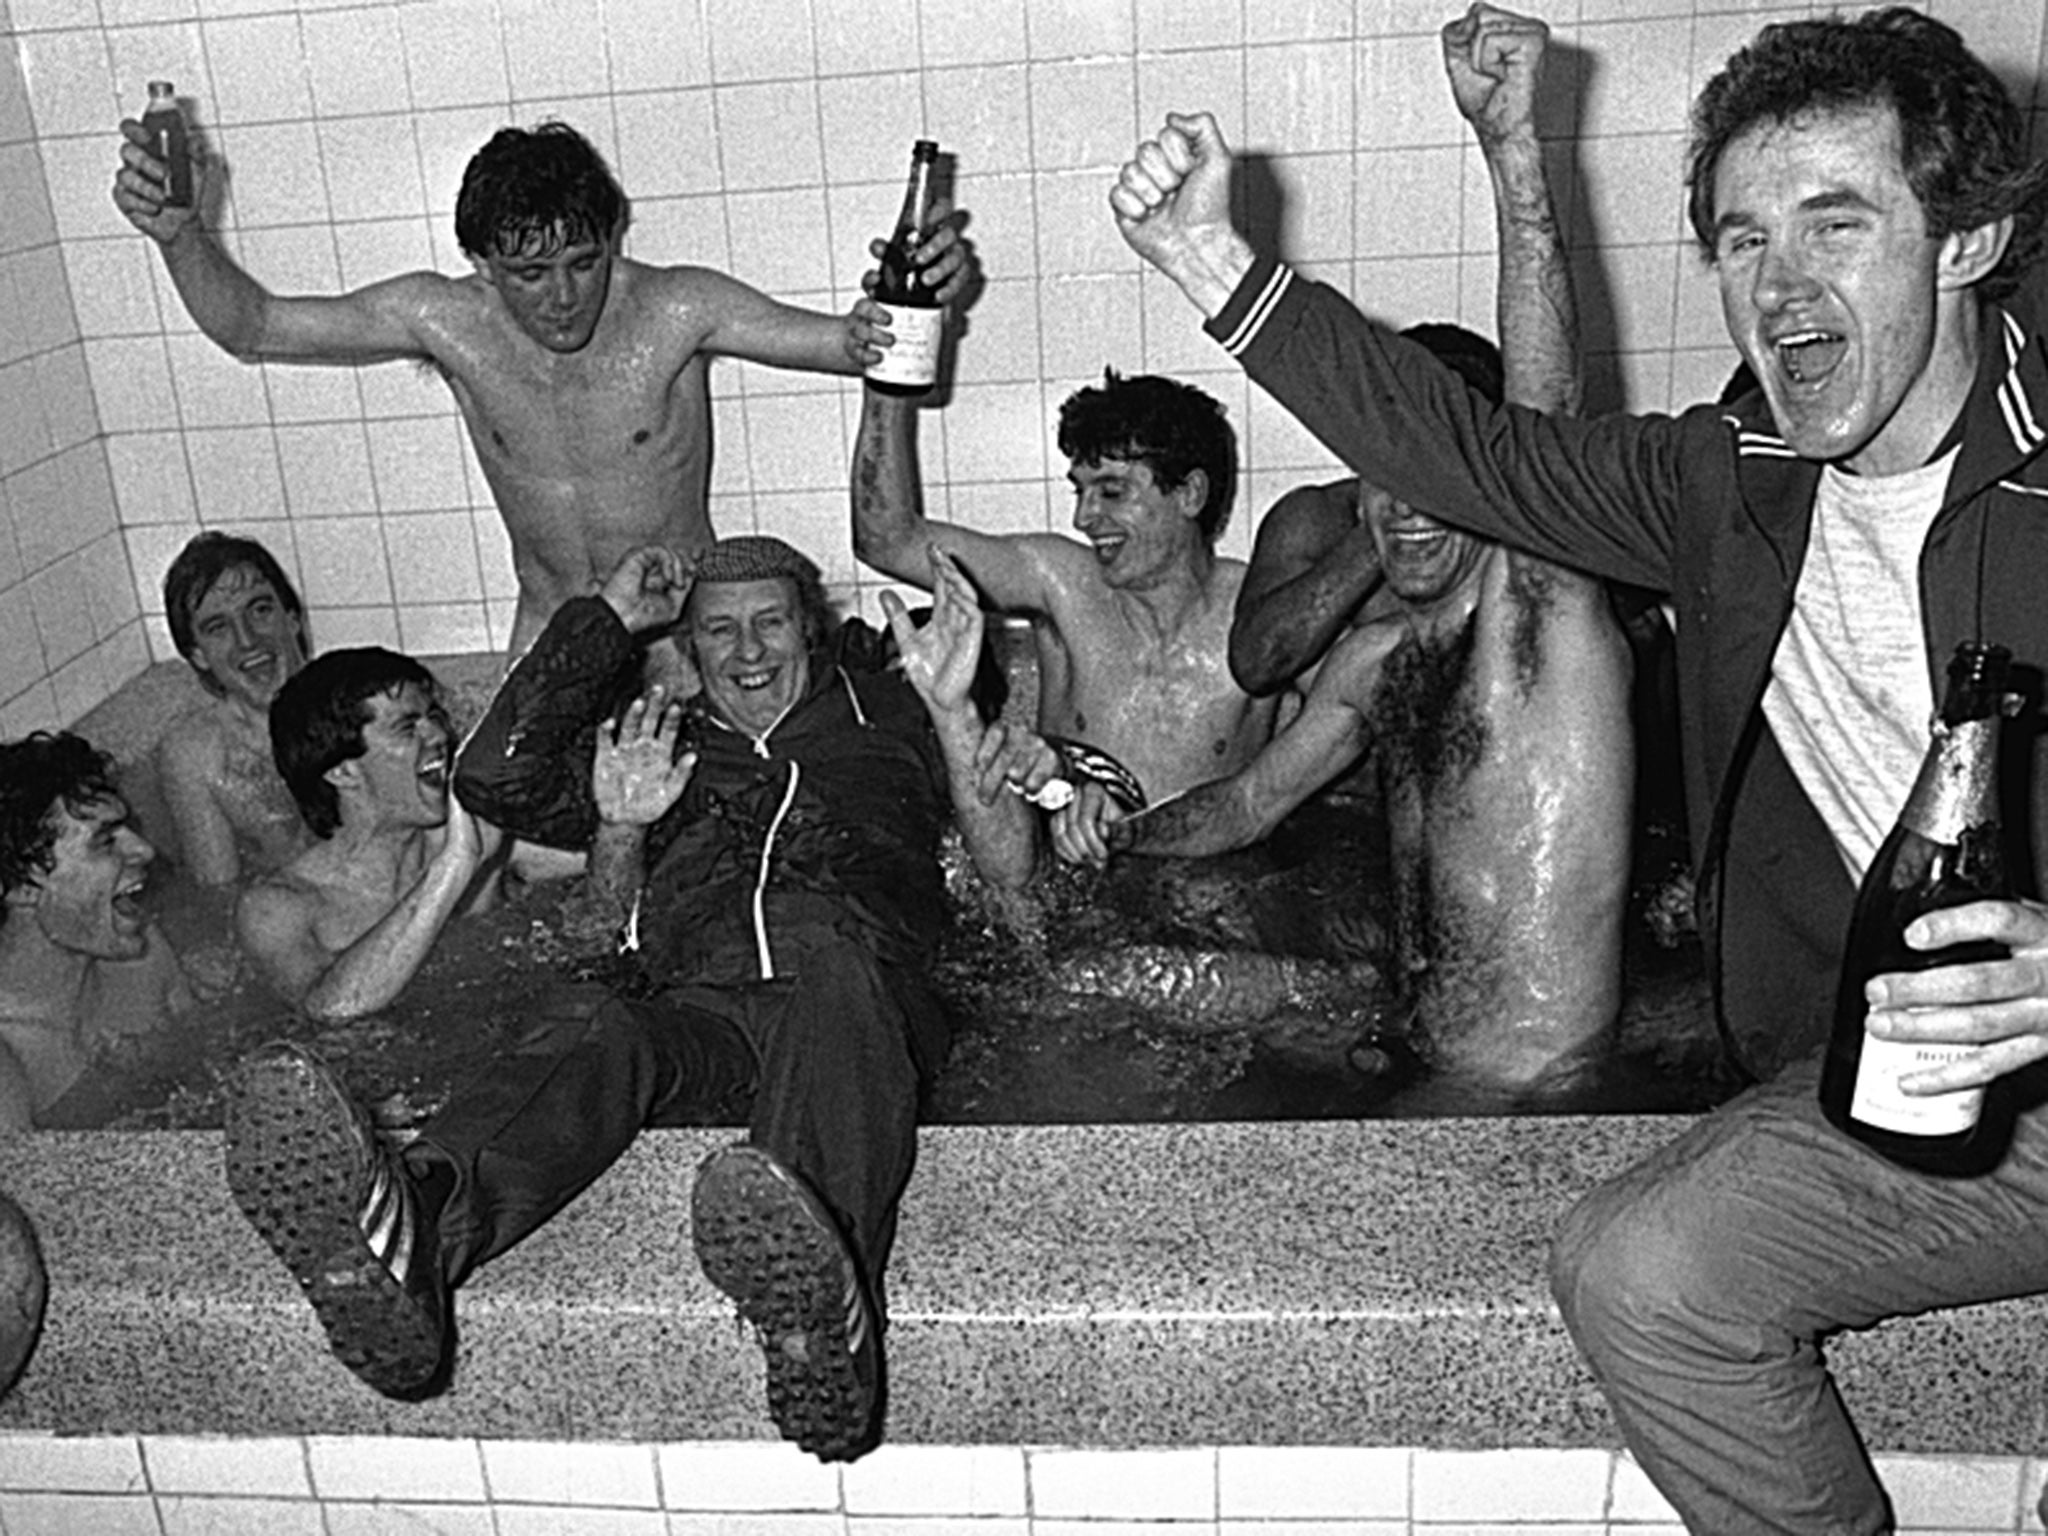 Bournemouth players and staff celebrate after their famous FA Cup win over Manchester United in 1984